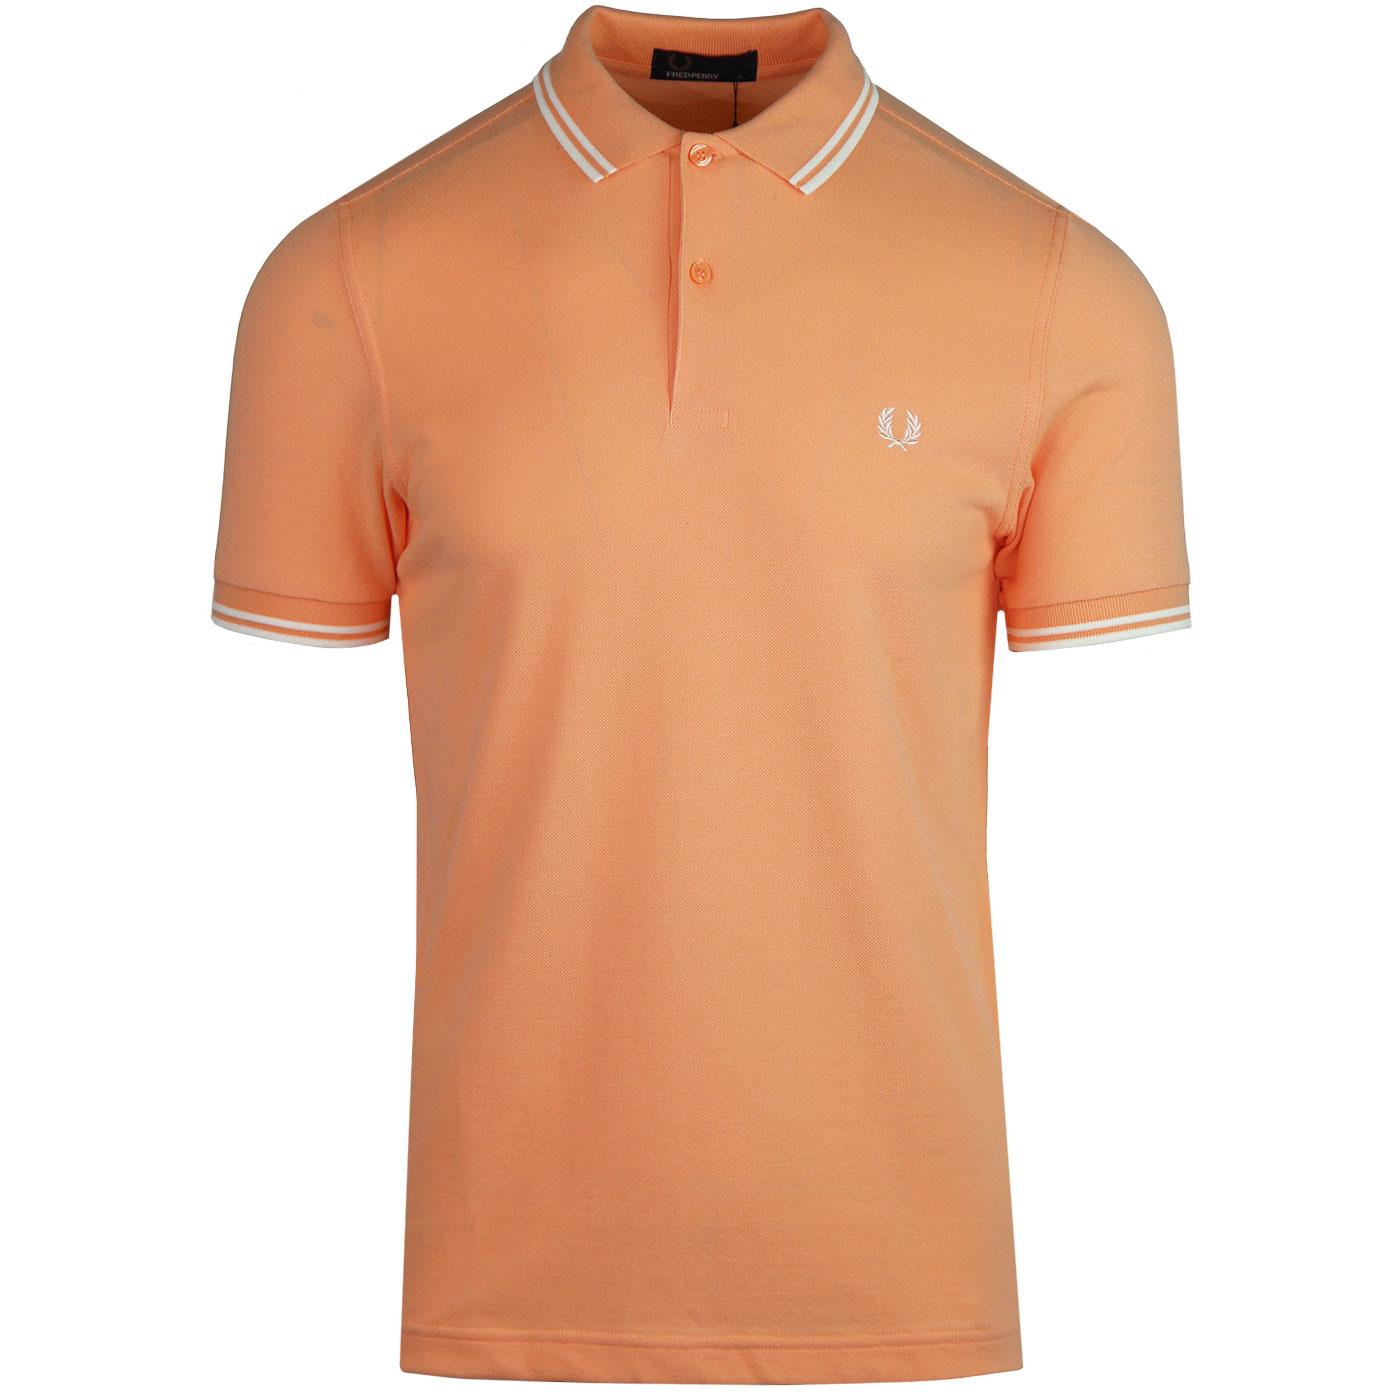 FRED PERRY M3600 Mod Twin Tipped Polo Shirt NECTAR